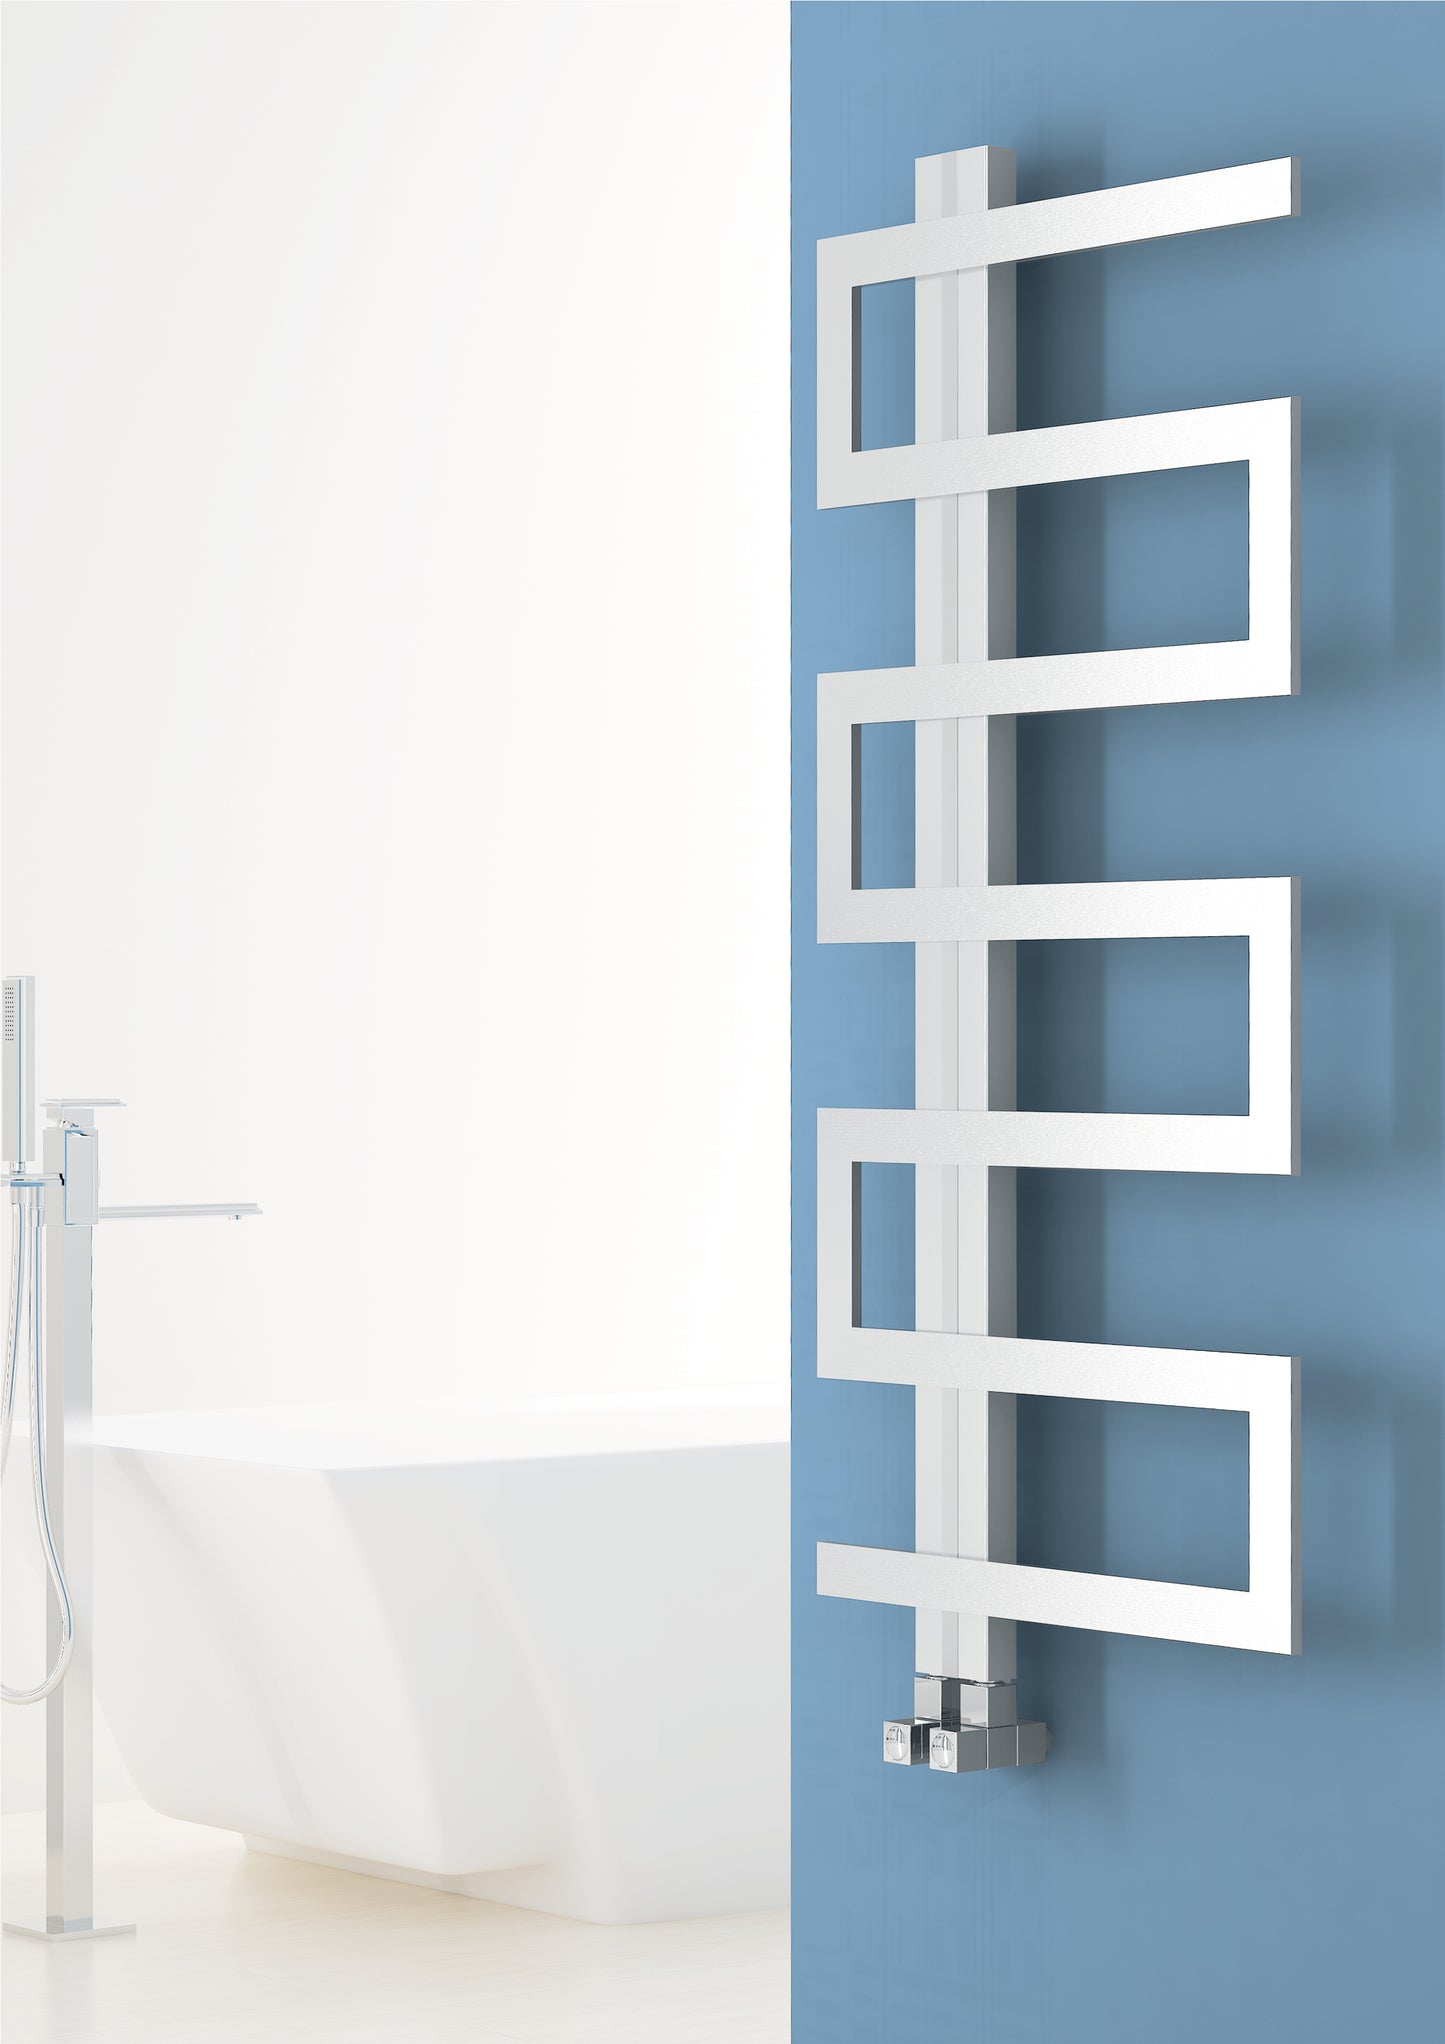 Ibiza Stainless Steel Heated Towel Rail - Various Colours + Sizes